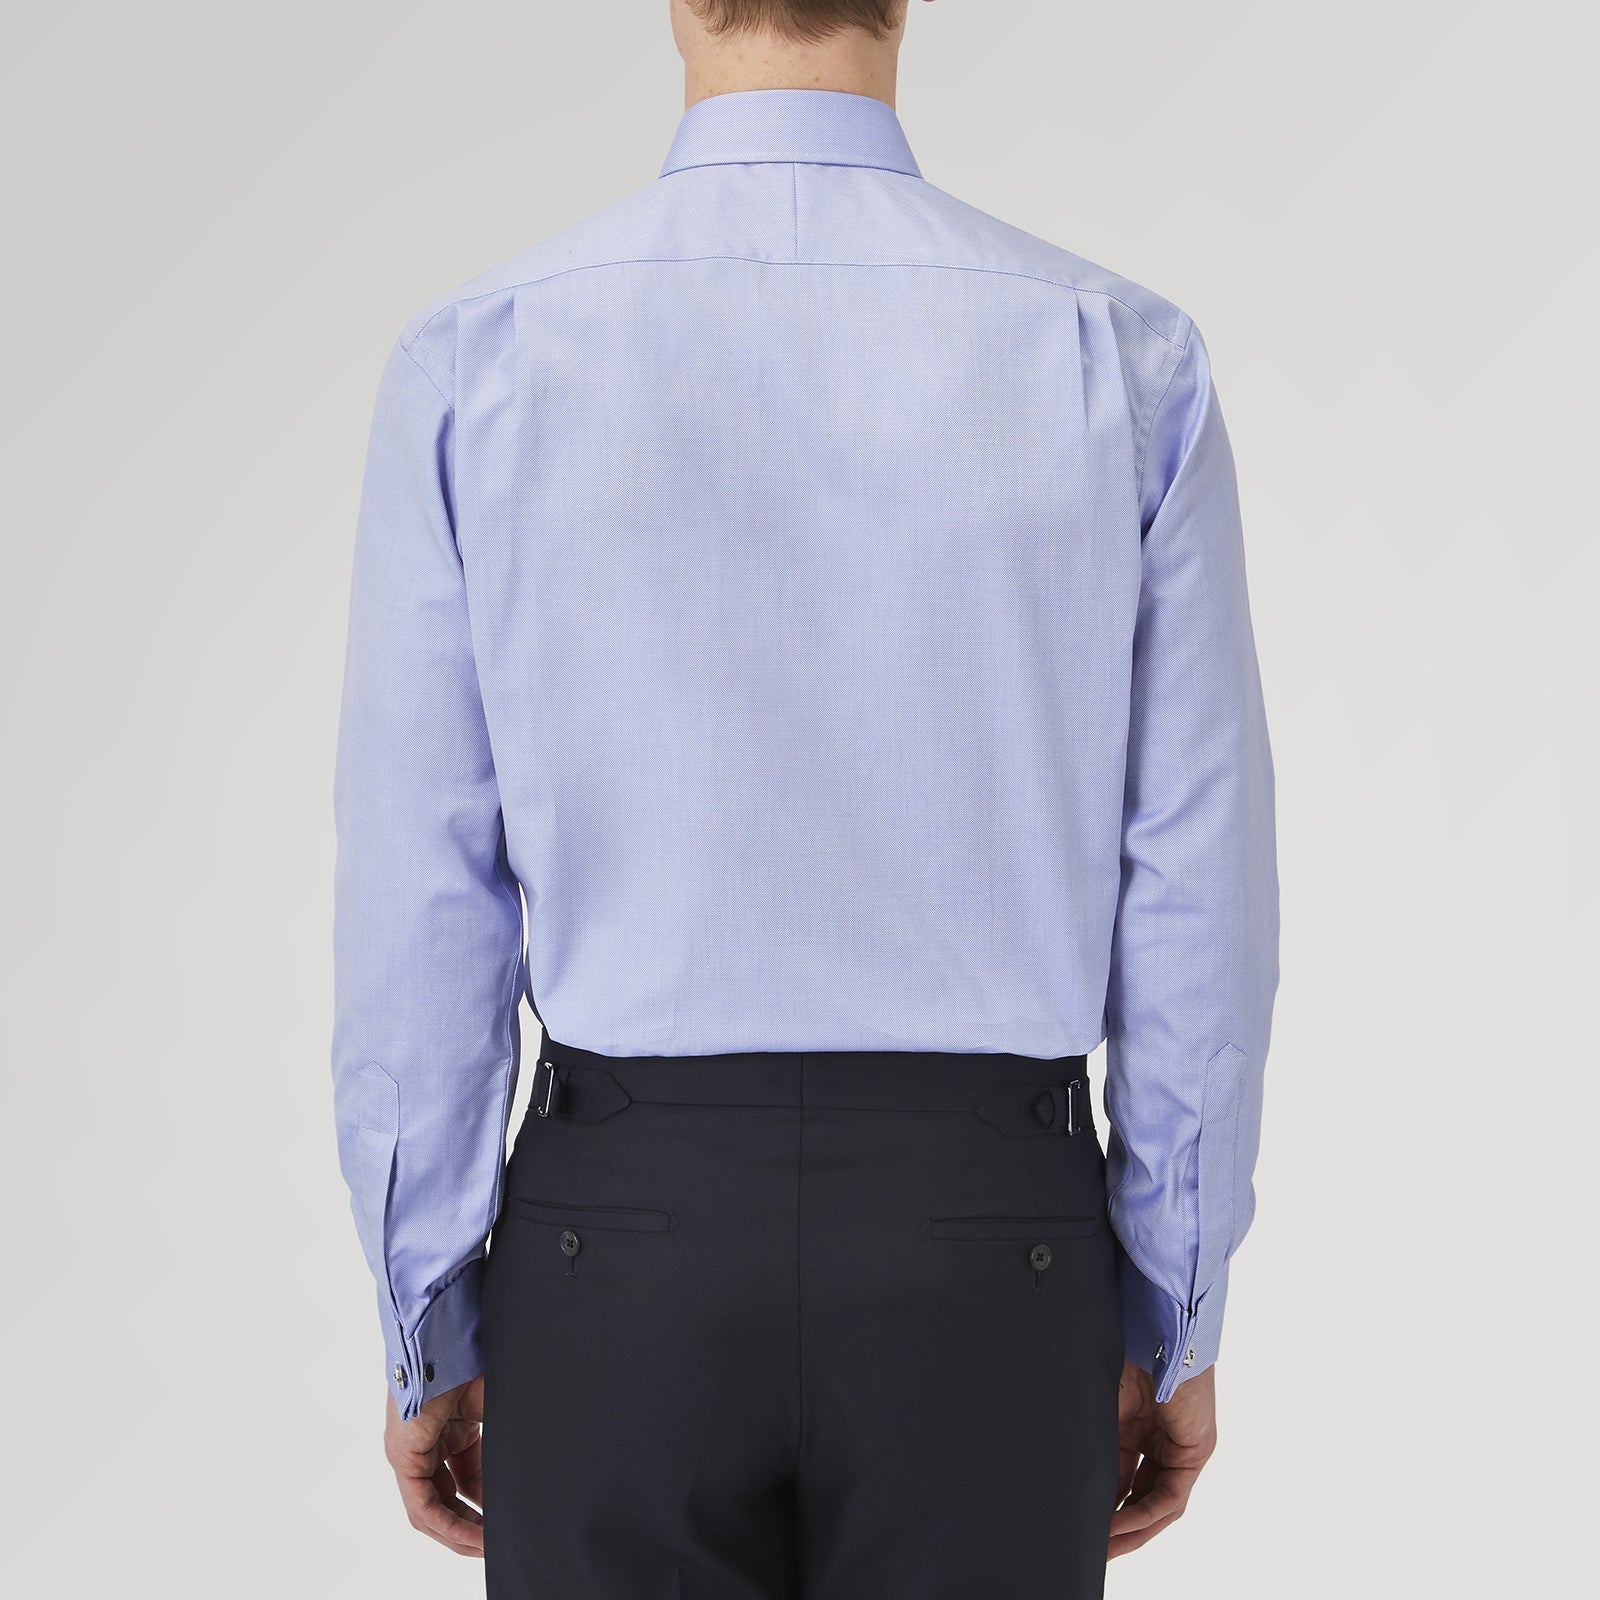 Blue Superfine Oxford Cotton Shirt with T&A Collar and Double Cuffs